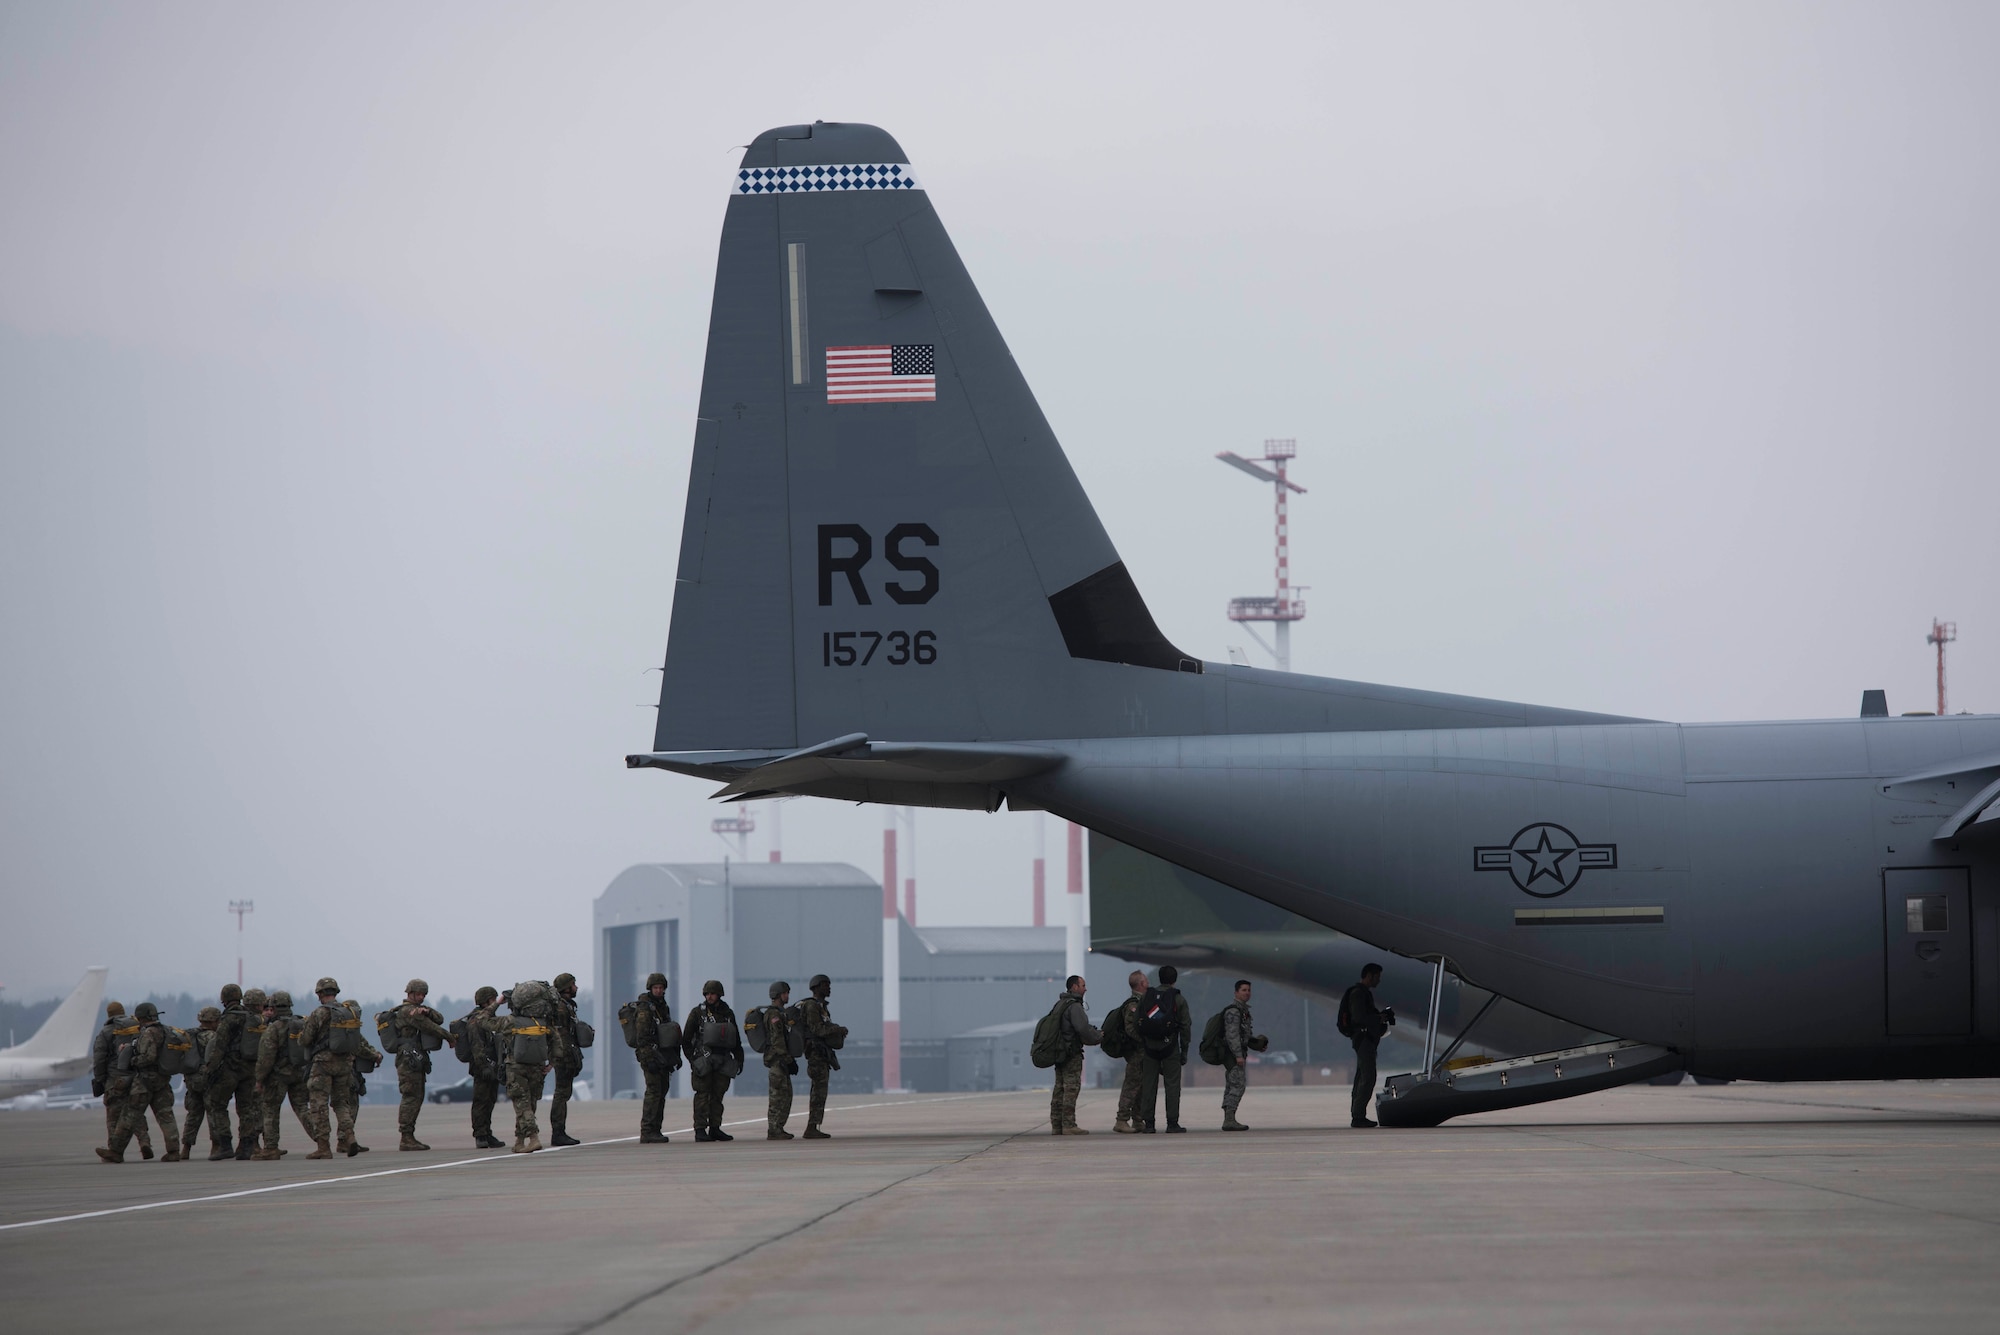 Paratroopers with the U.S. Air Force, U.S. Army, and German Air Force, prepare to board a U.S. Air Force C-130J Super Hercules on Ramstein Air Base, Germany, Dec. 6, 2017. The paratroopers participated in Operation Toy Drop 2017 to maintain their military free fall and jump master proficiencies. (U.S. Air Force photo by Senior Airman Devin M. Rumbaugh)